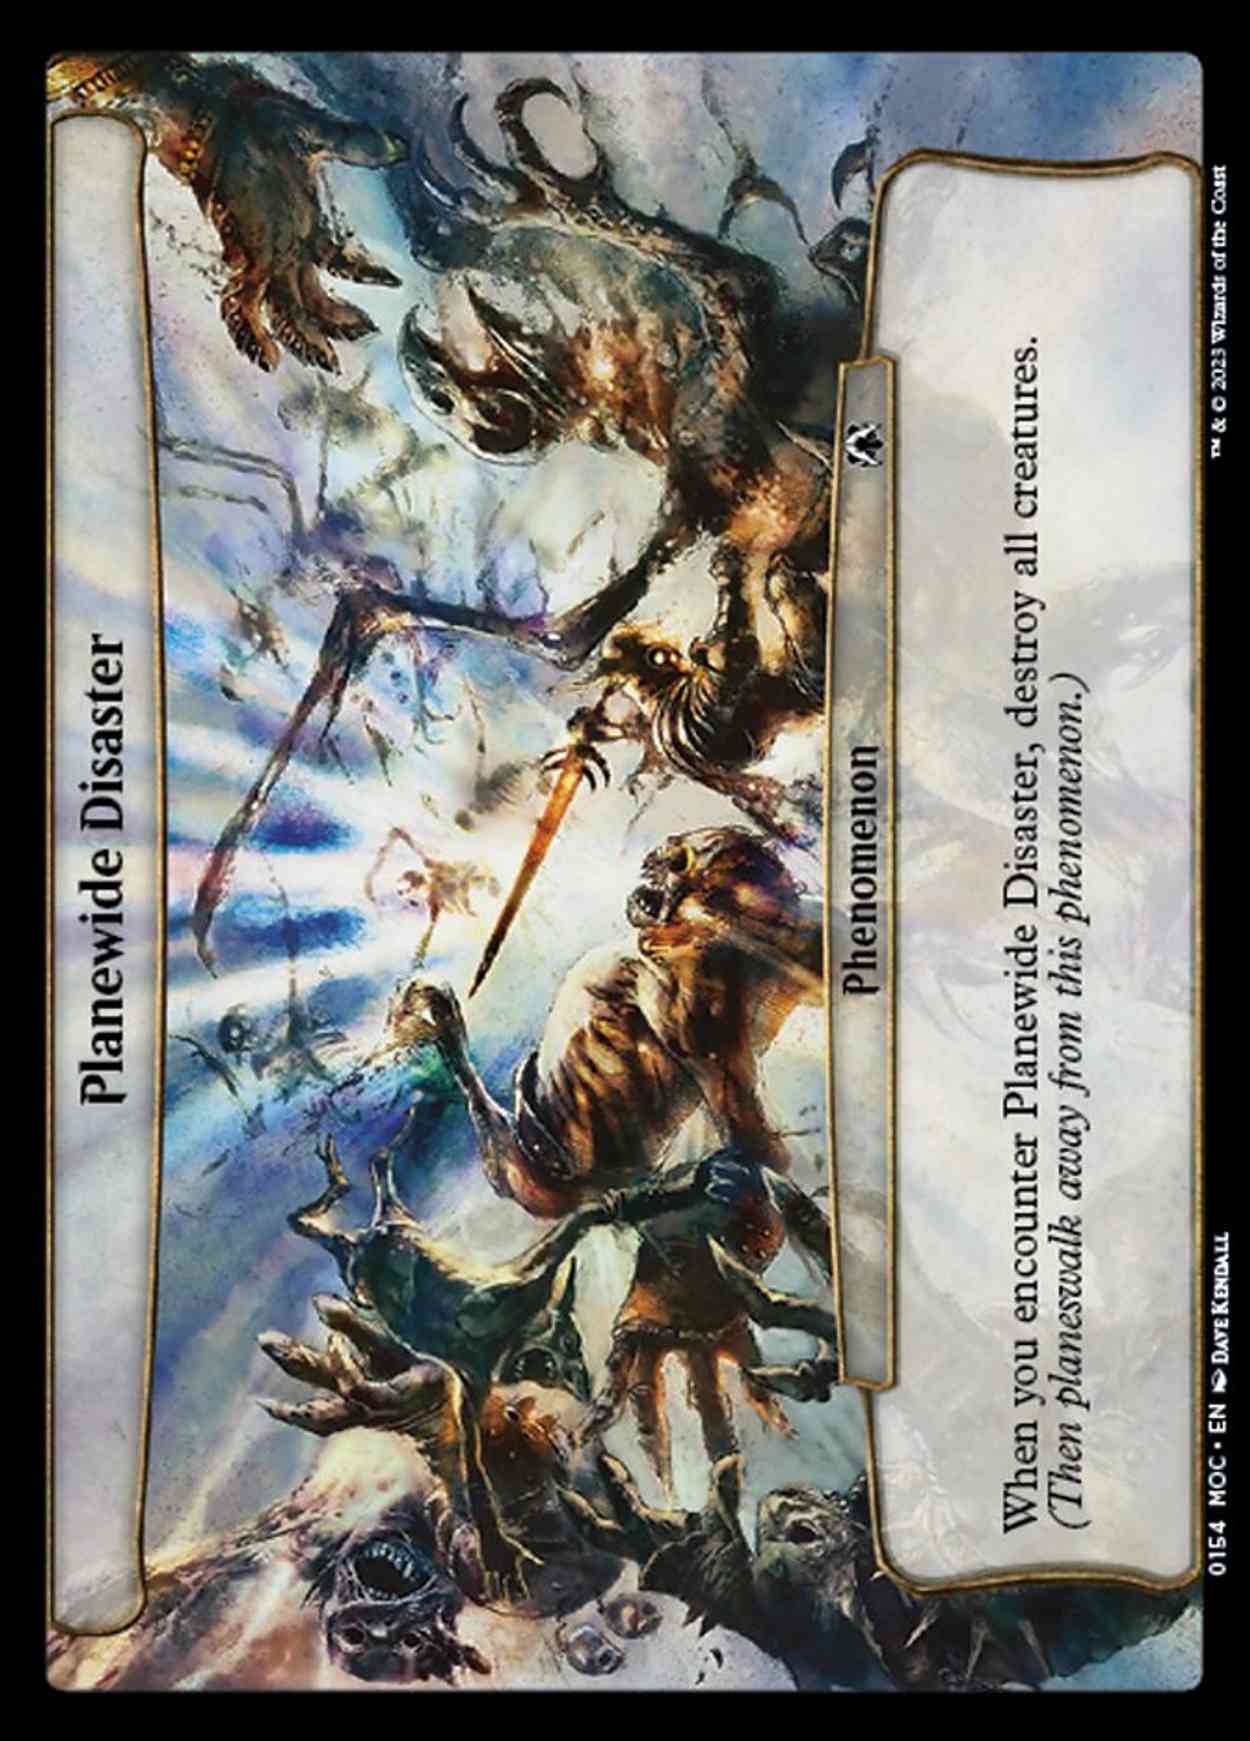 Planewide Disaster magic card front